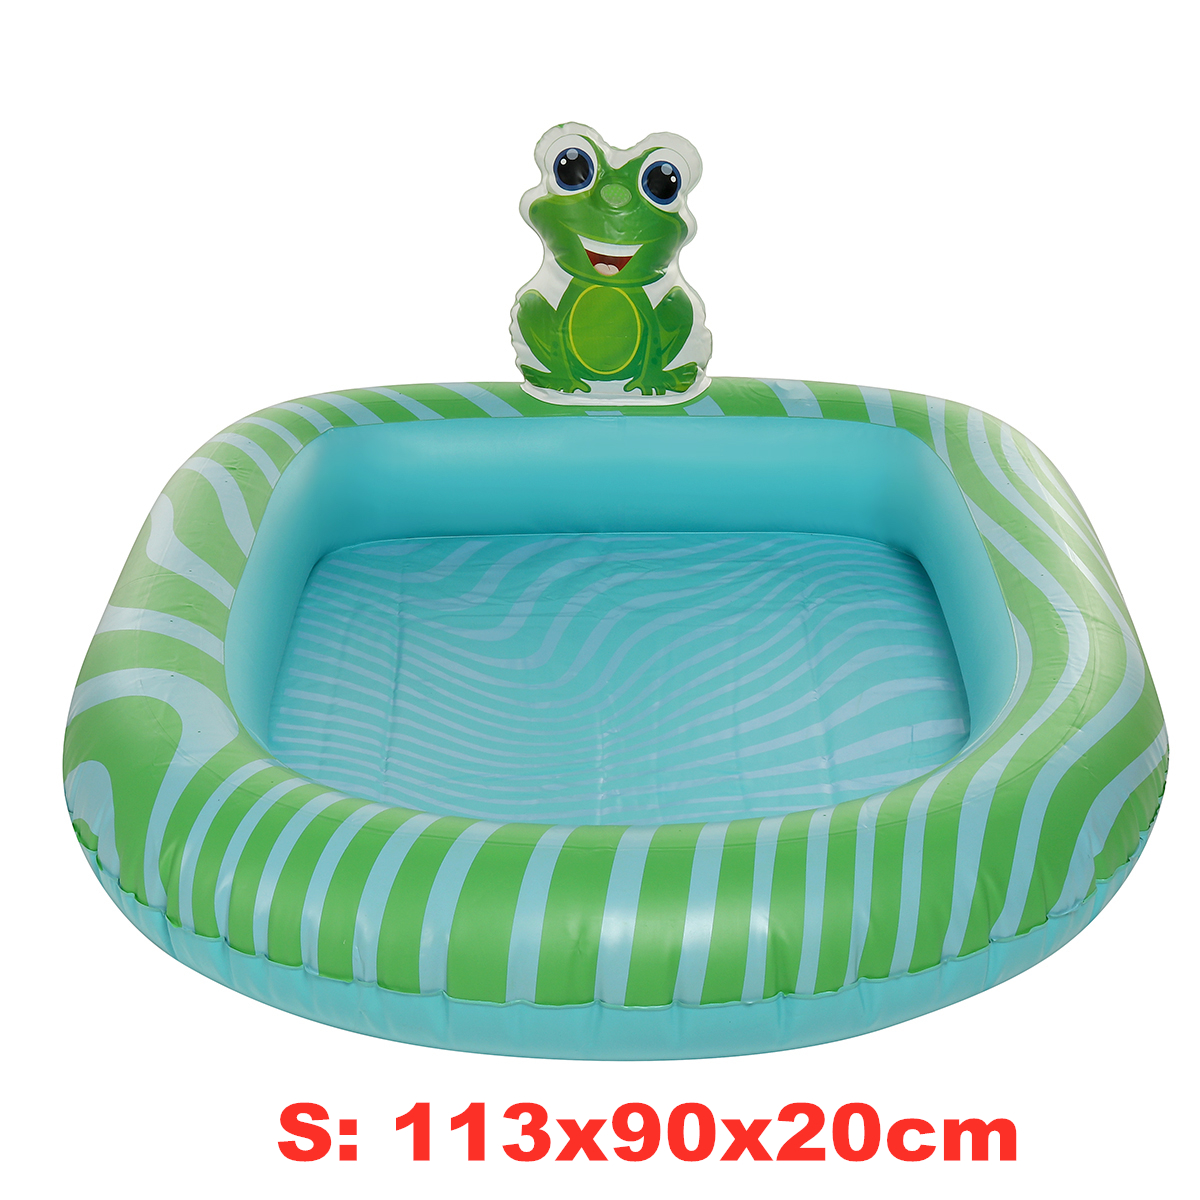 PVC-Children-Inflatable-Swimming-Pool-Sprinkler-Pool-Thickened-Cartoon-Pattern-Outdoor-Swimming-Wate-1851764-4